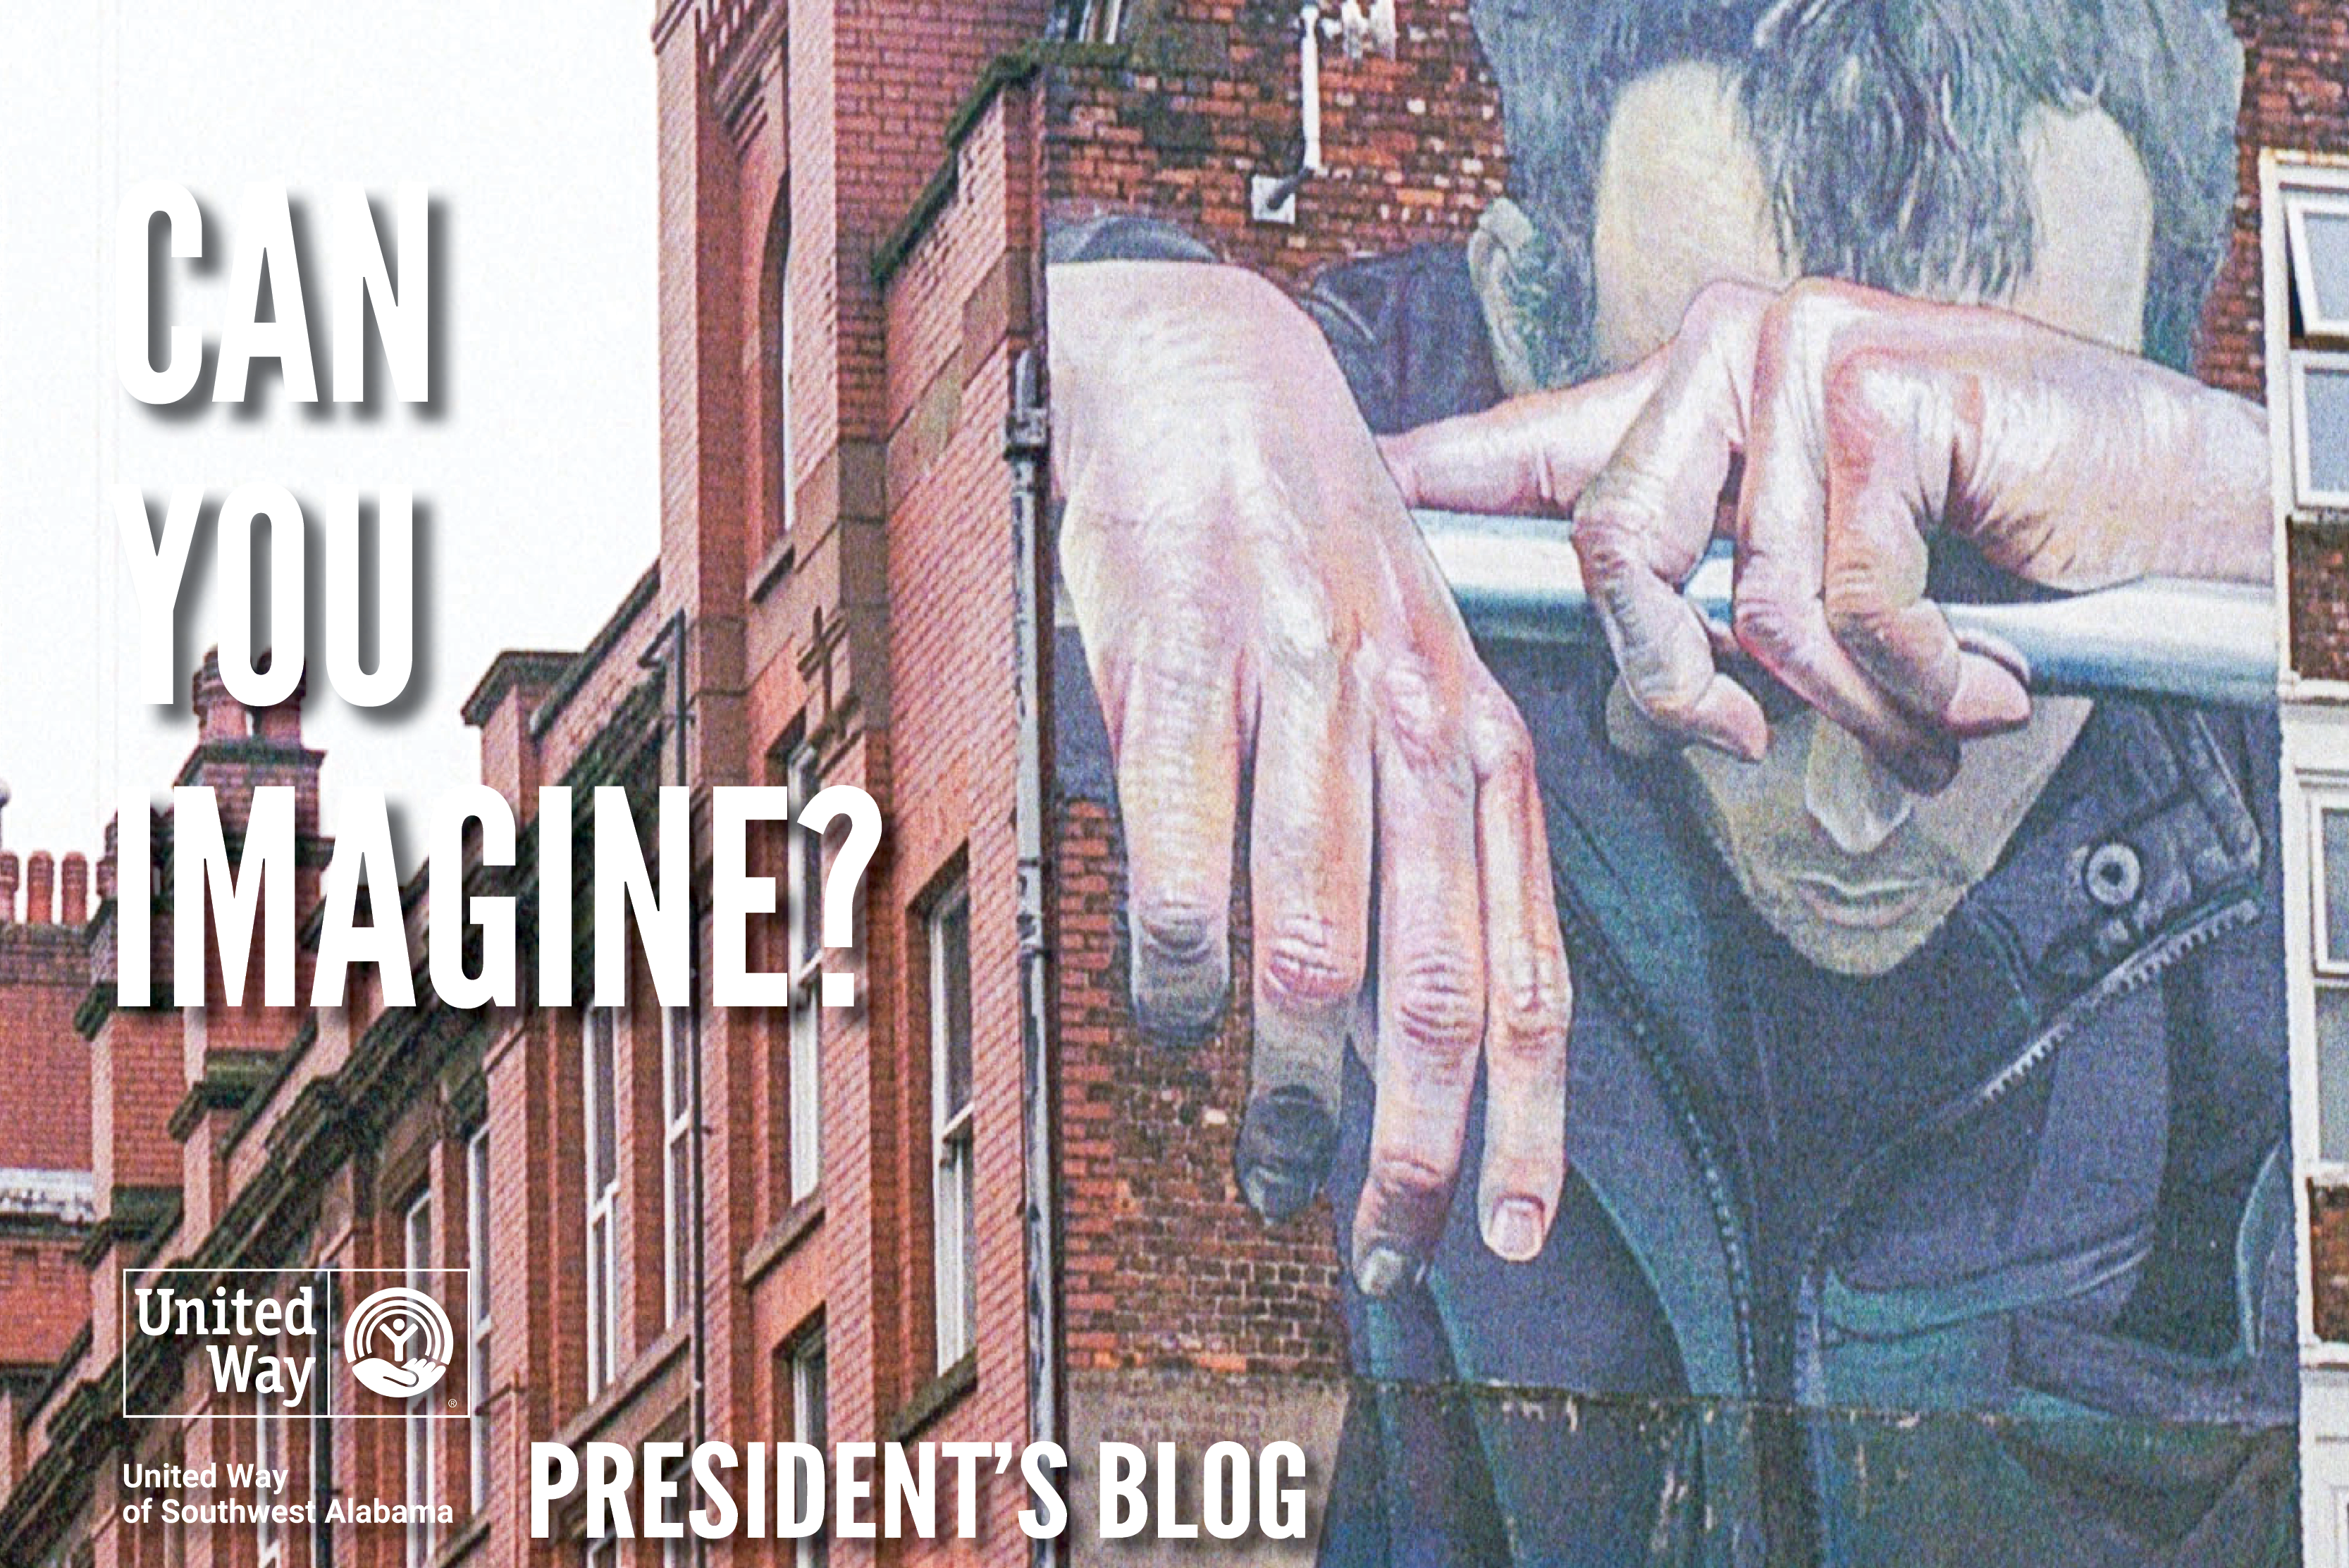 May President's Blog: Can You Imagine?